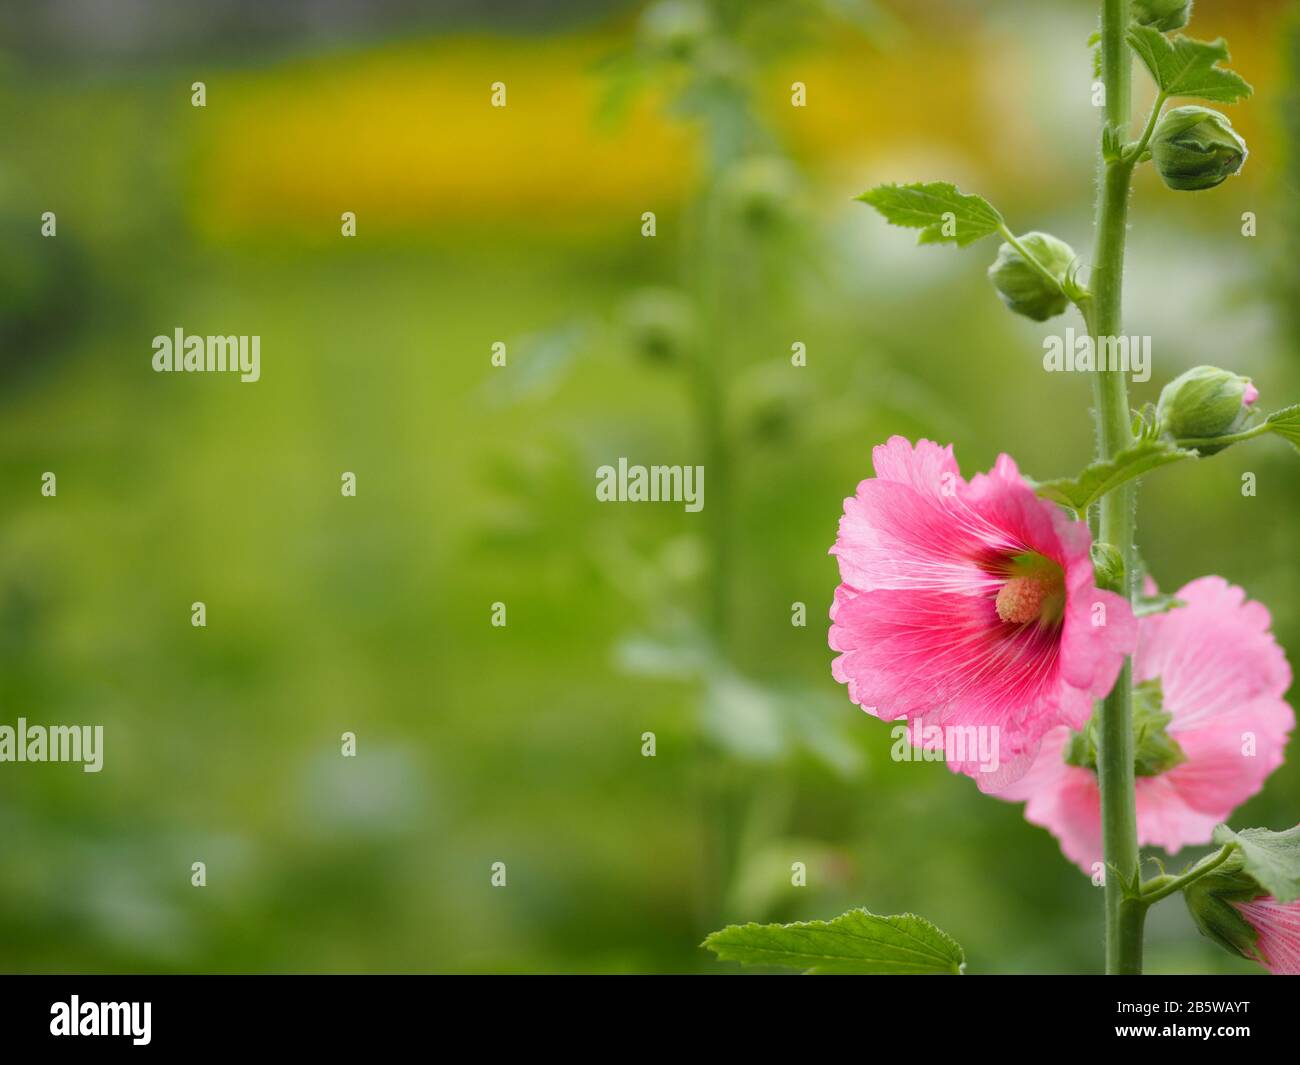 Hardy annual or perennial Althaea include Hollyhock, Marsh Mallow Mallards, and Sweet weed, Pink flower in garden on blurred of nature background Stock Photo